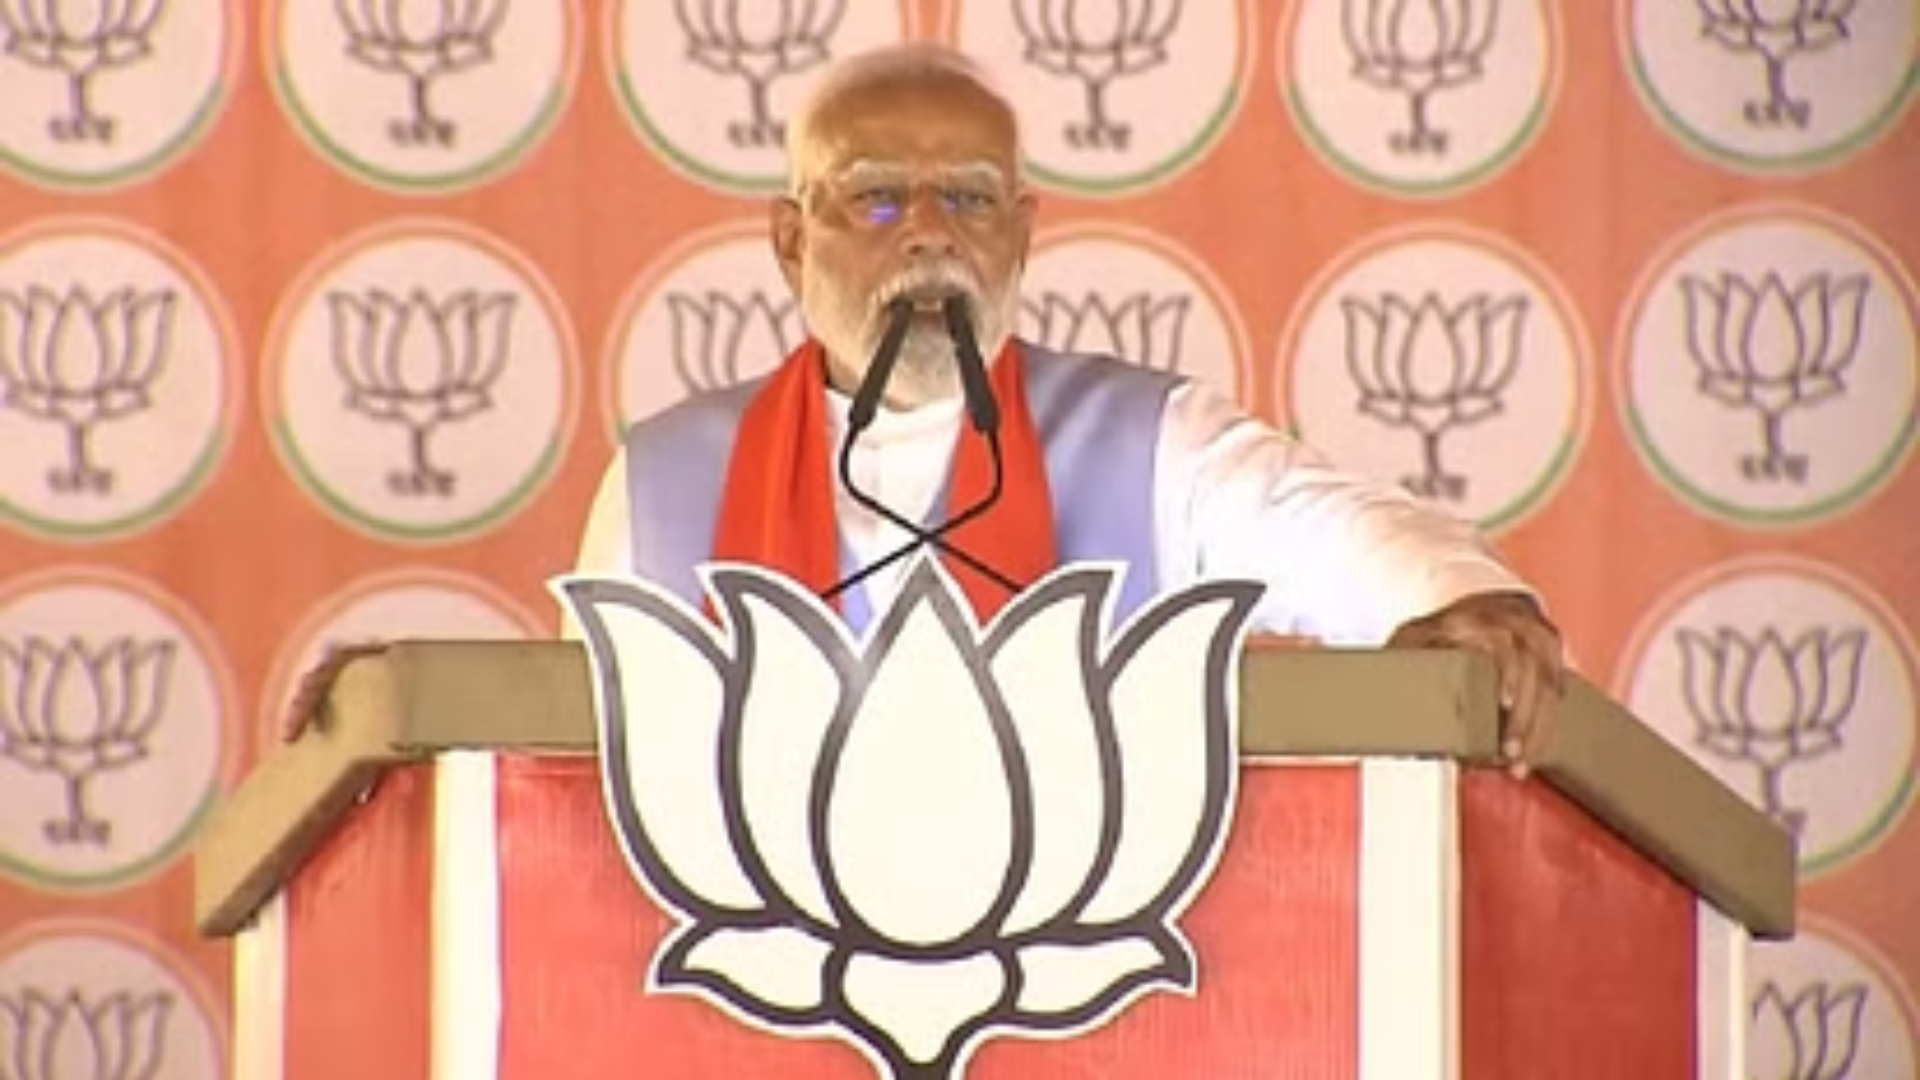 PM Modi Rallies Voters in Barabanki, Condemns Opposition and Highlights Development By The BJP Government